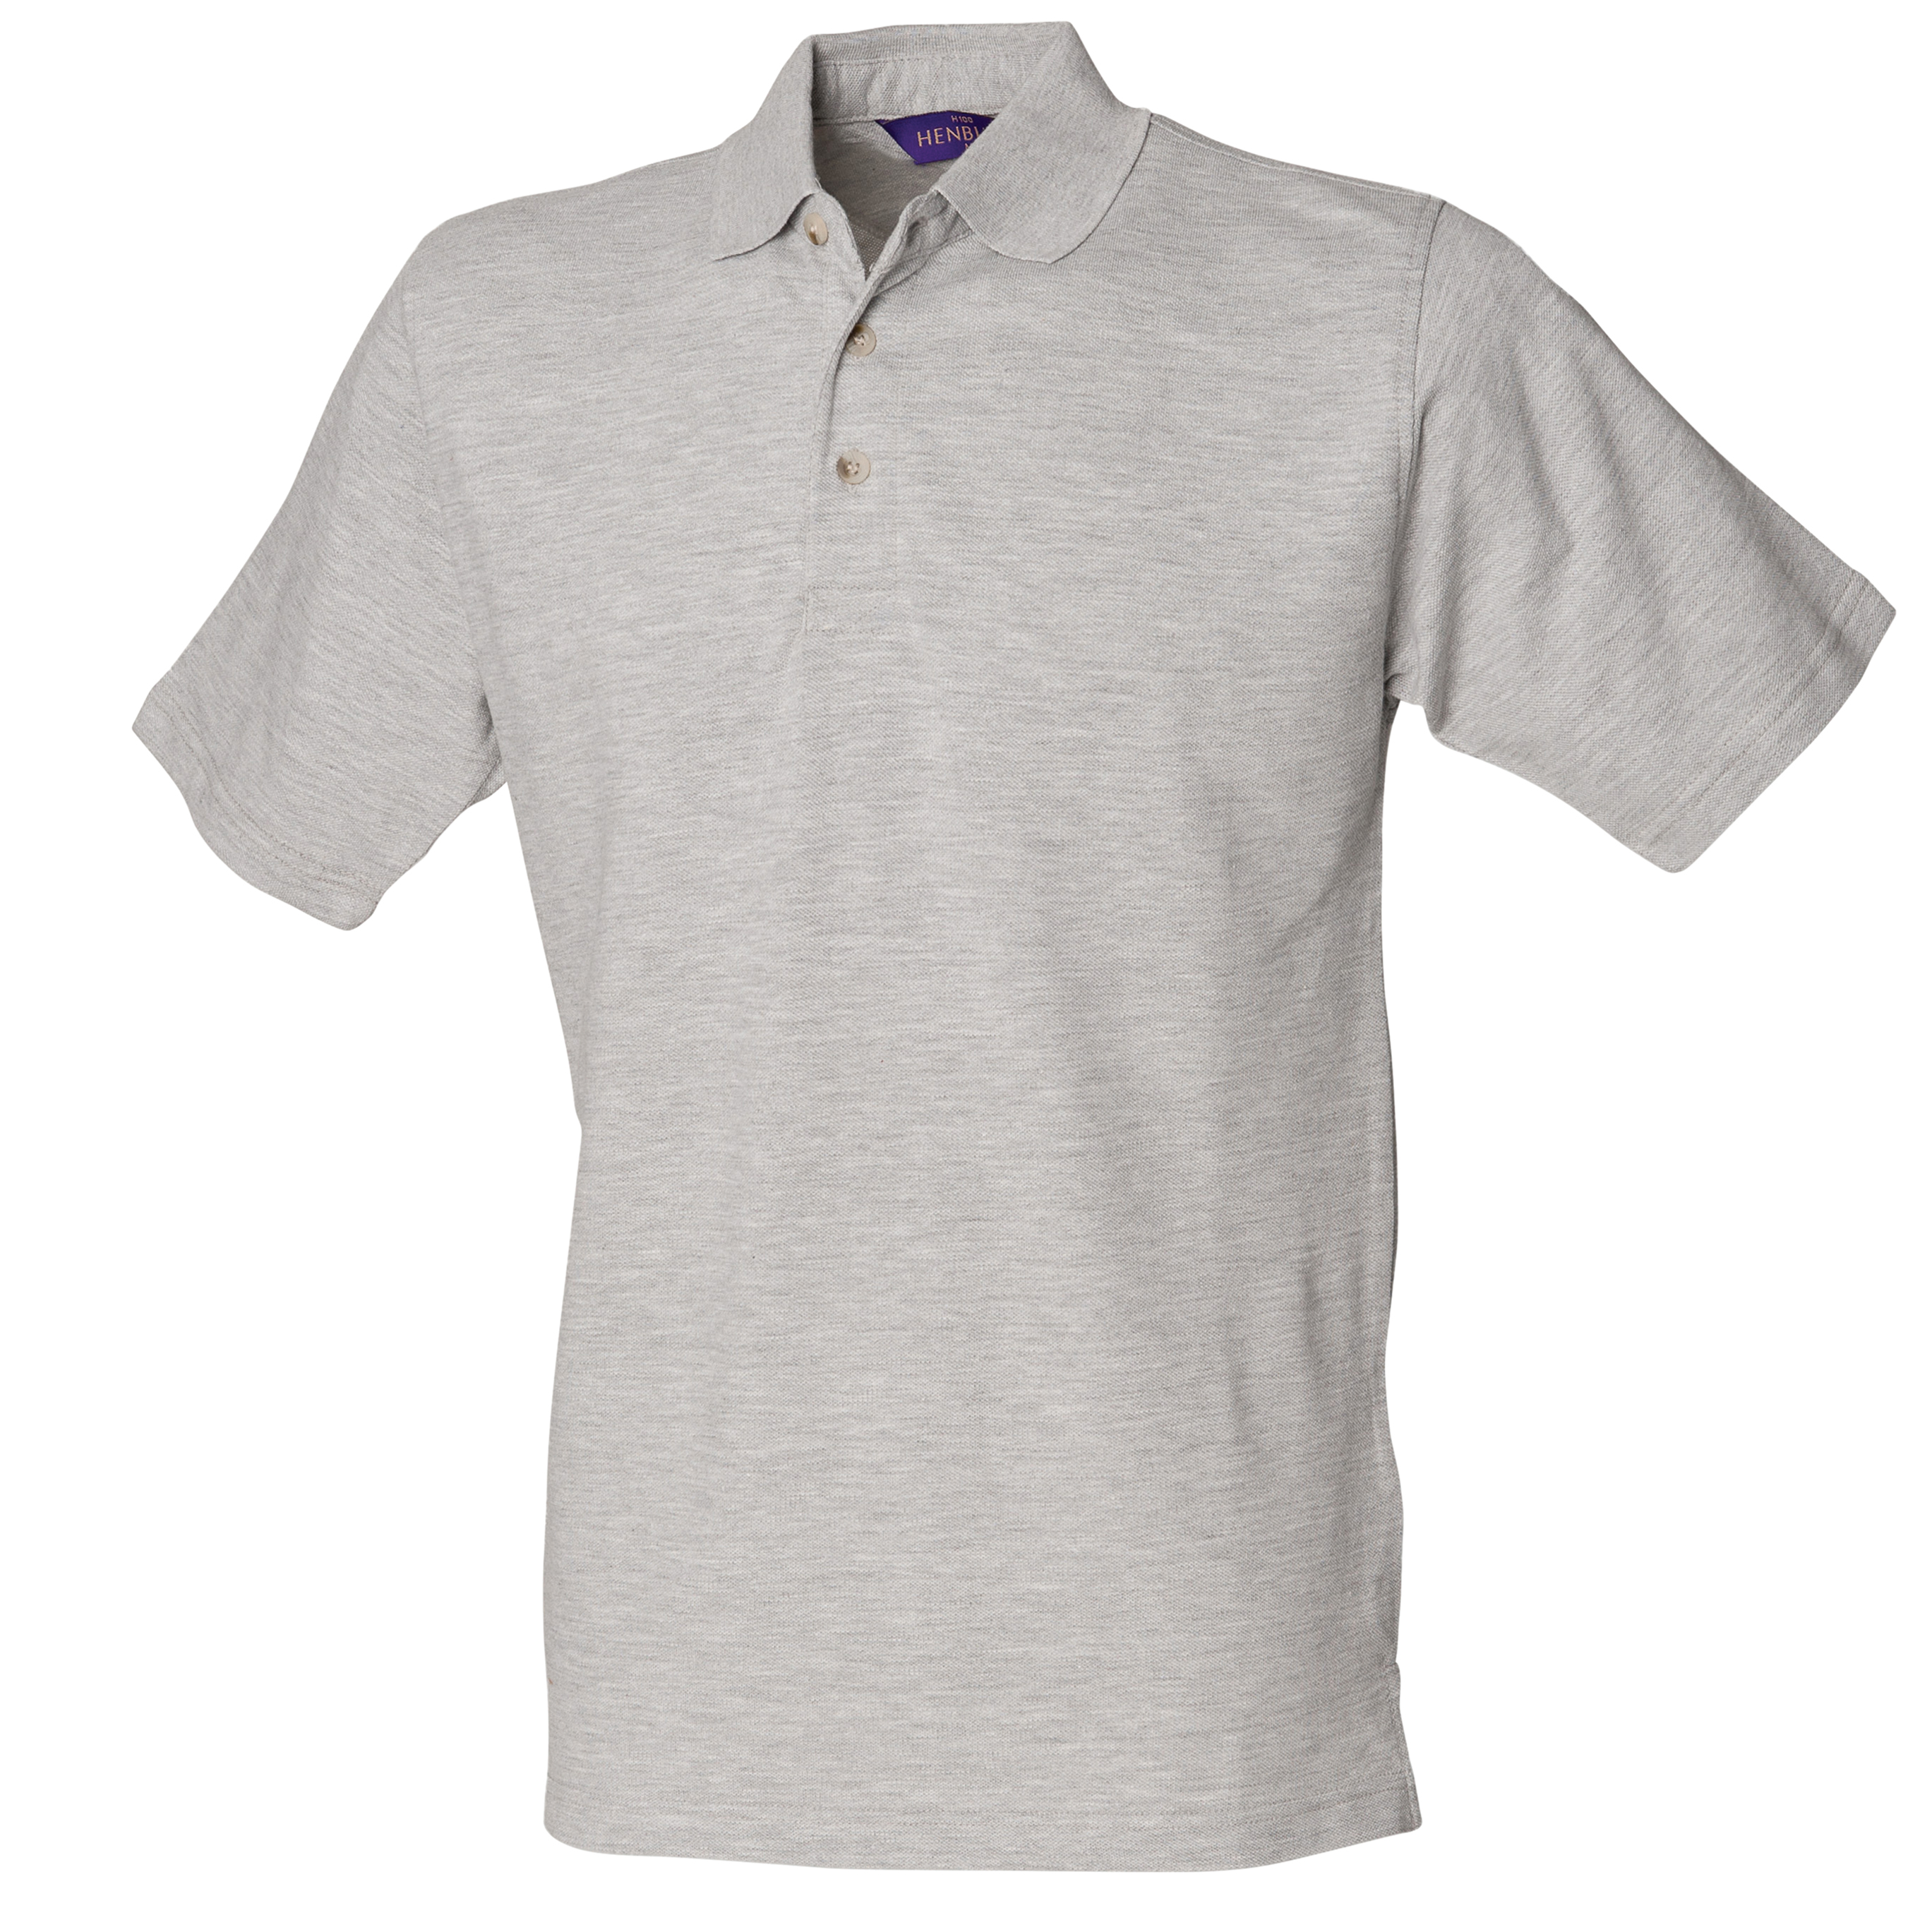 ax-httpswebsystems.s3.amazonaws.comtmp_for_downloadhenbury-classic-cotton-pique-polo-stand-up-heather-grey.jpg